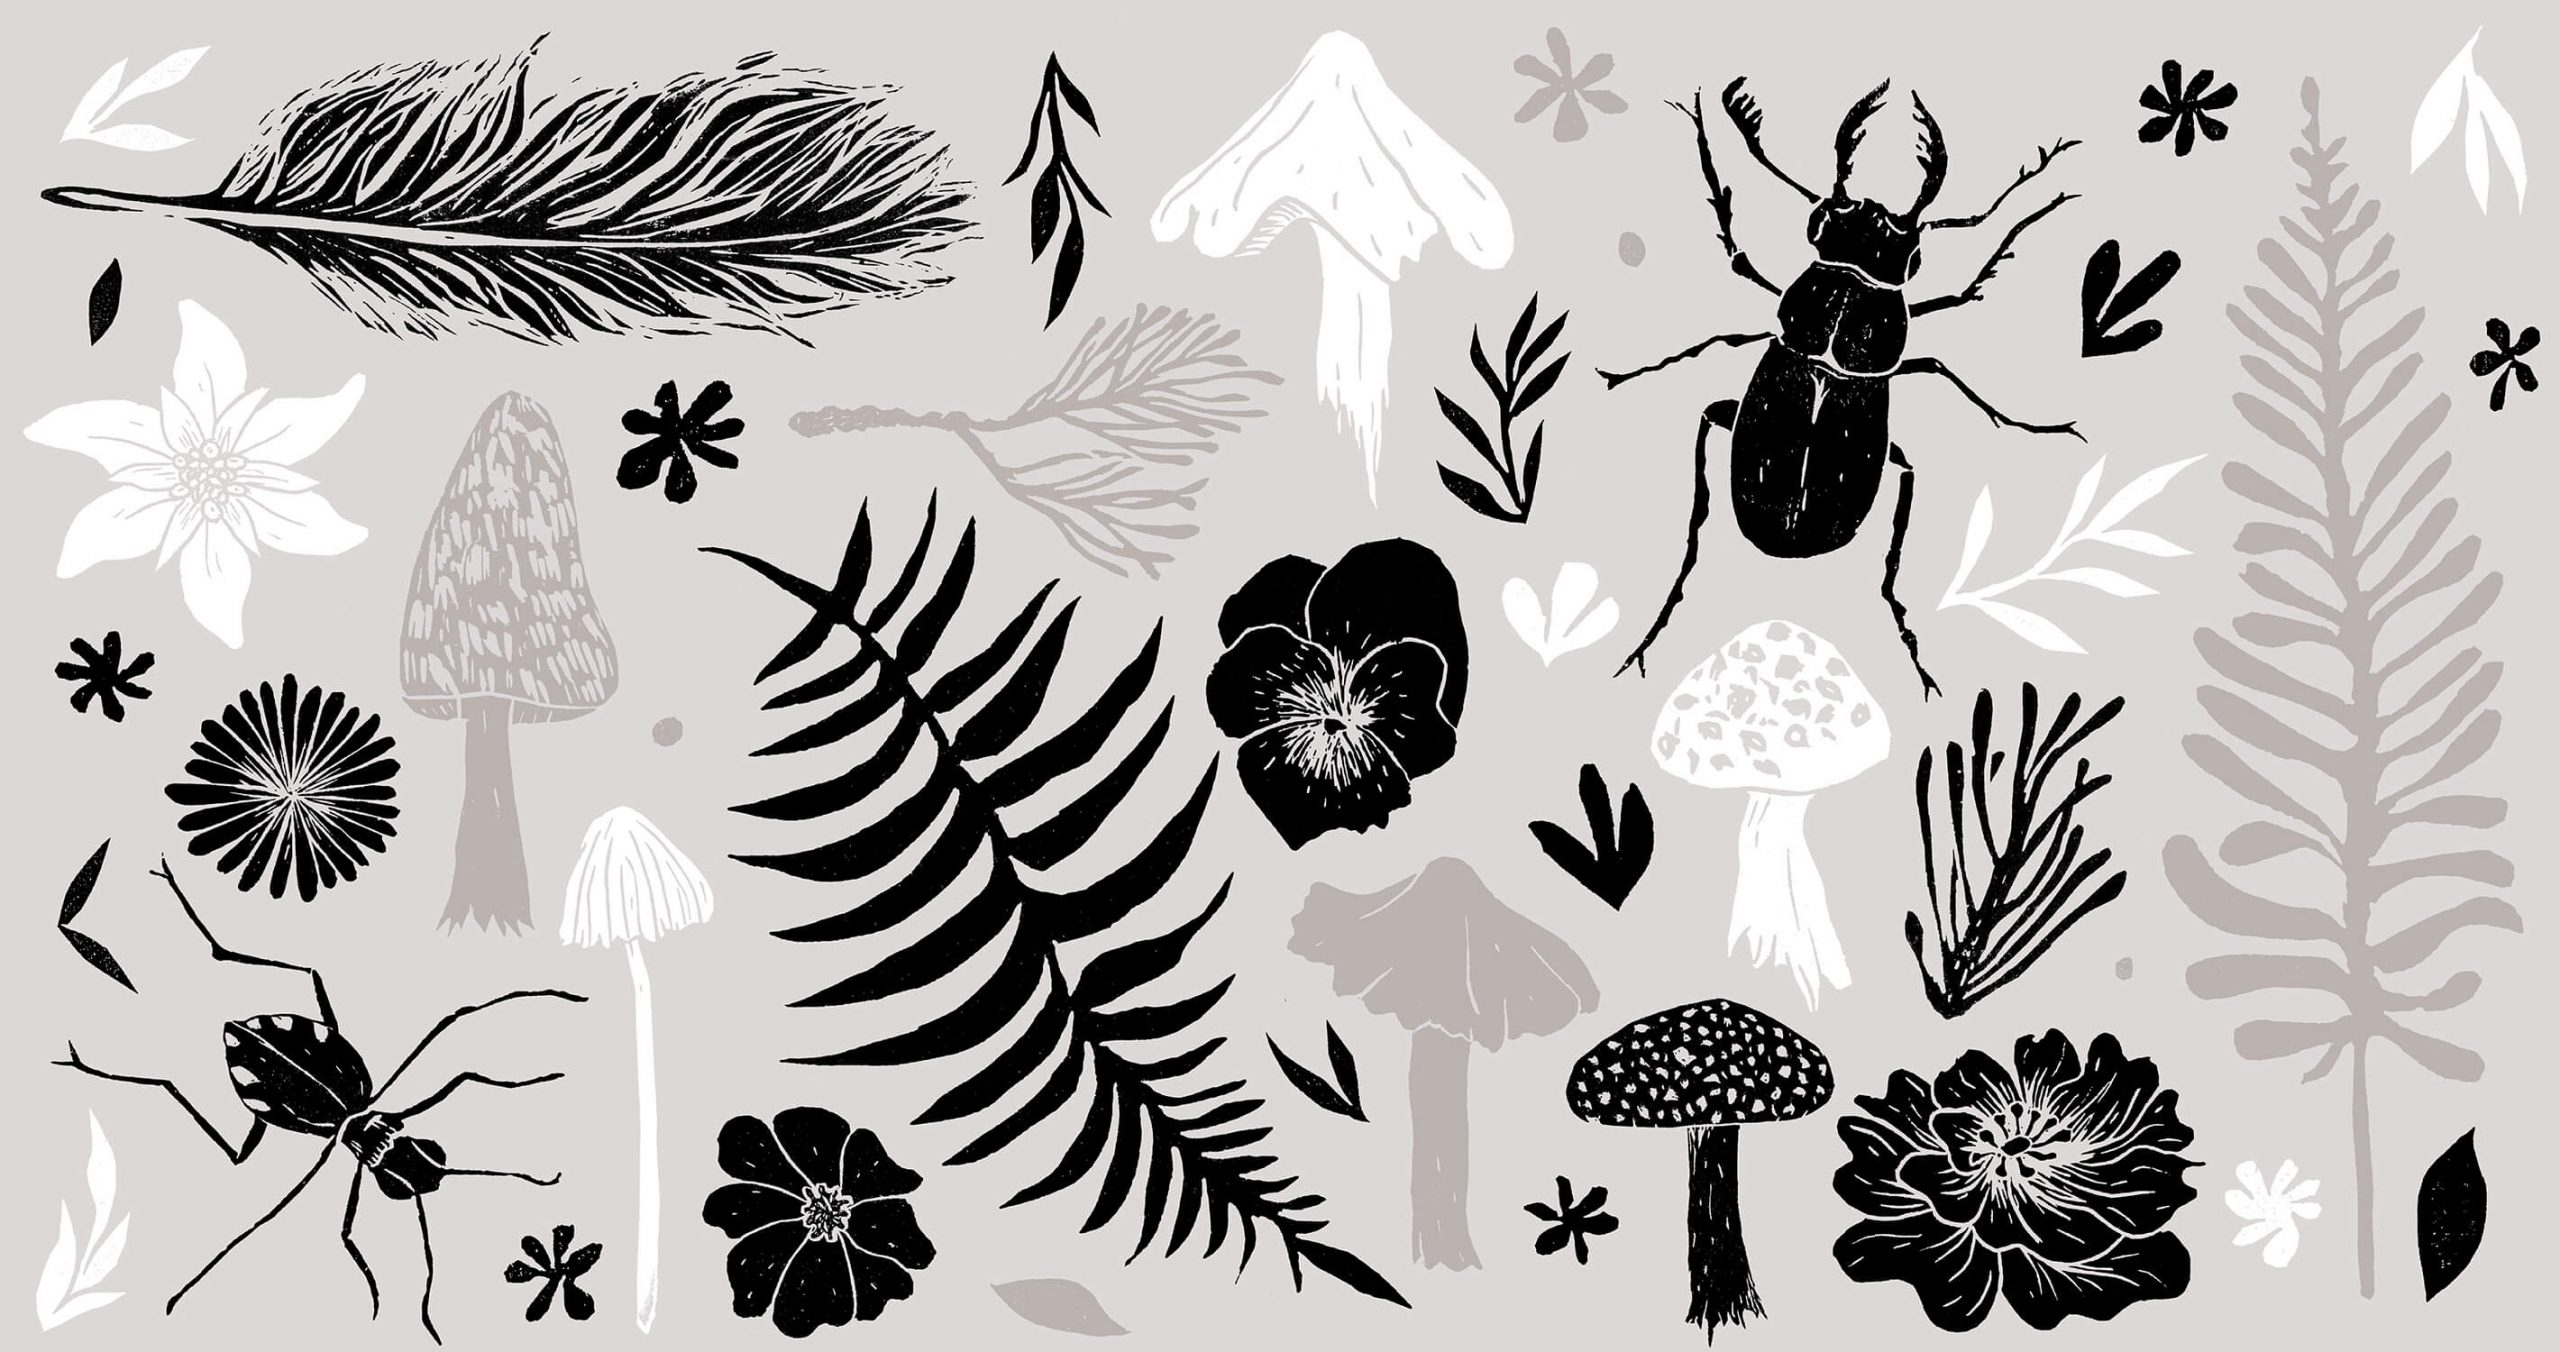 custom linoprint support graphics featuring insects and plants per teh forest inspired brand moss and brooke. The assets are textual but elegant and make for a unique brand identity.